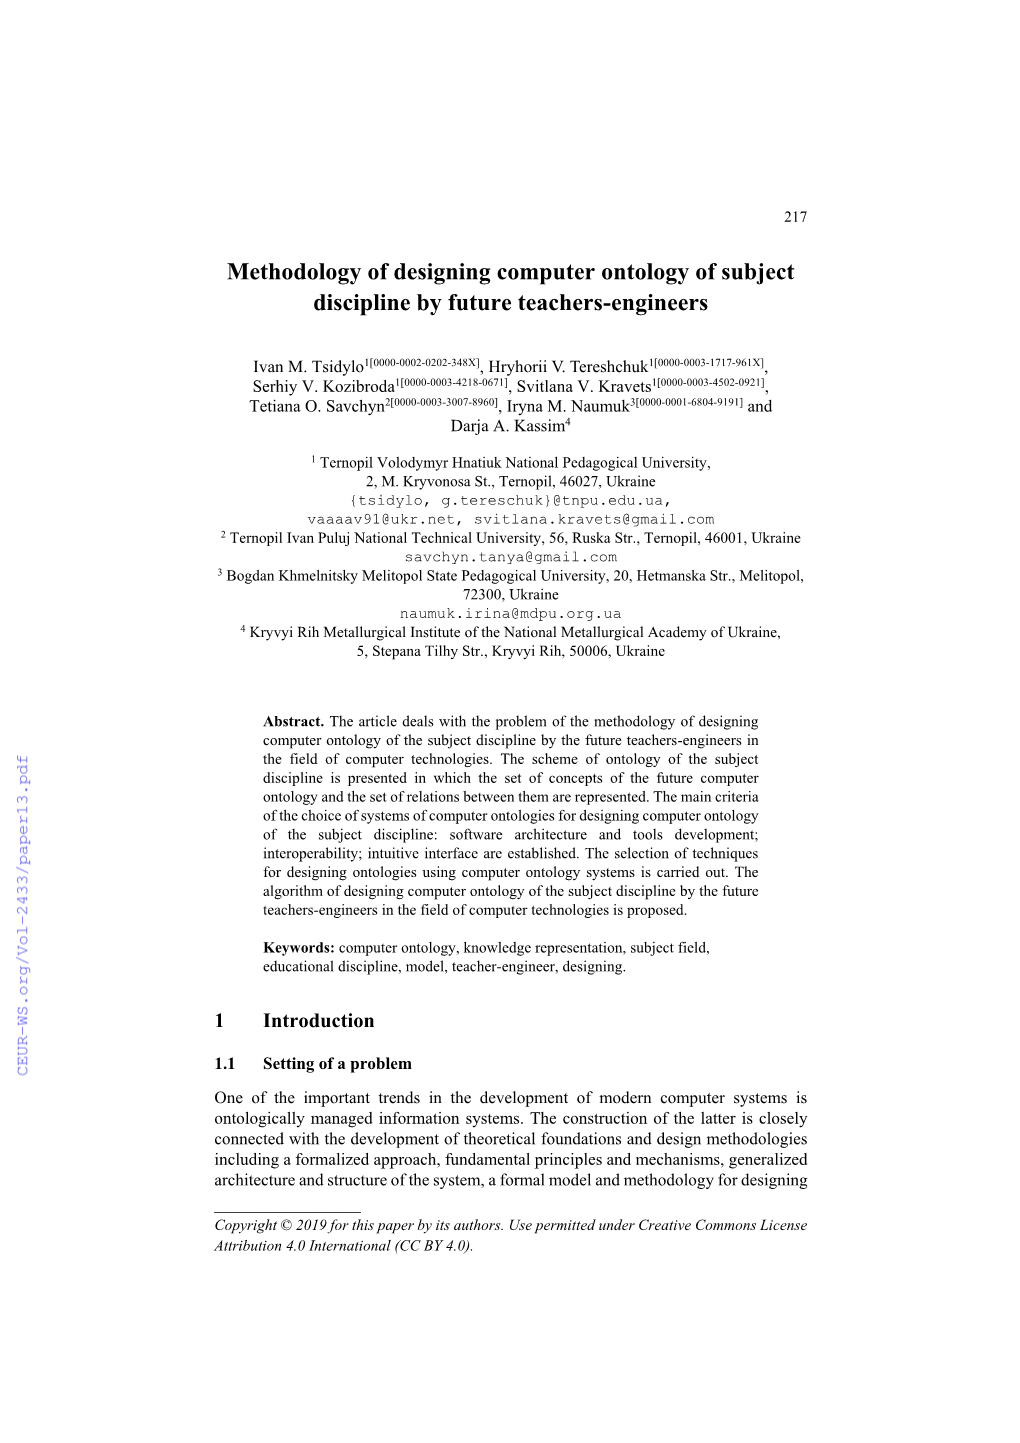 Methodology of Designing Computer Ontology of Subject Discipline by Future Teachers-Engineers